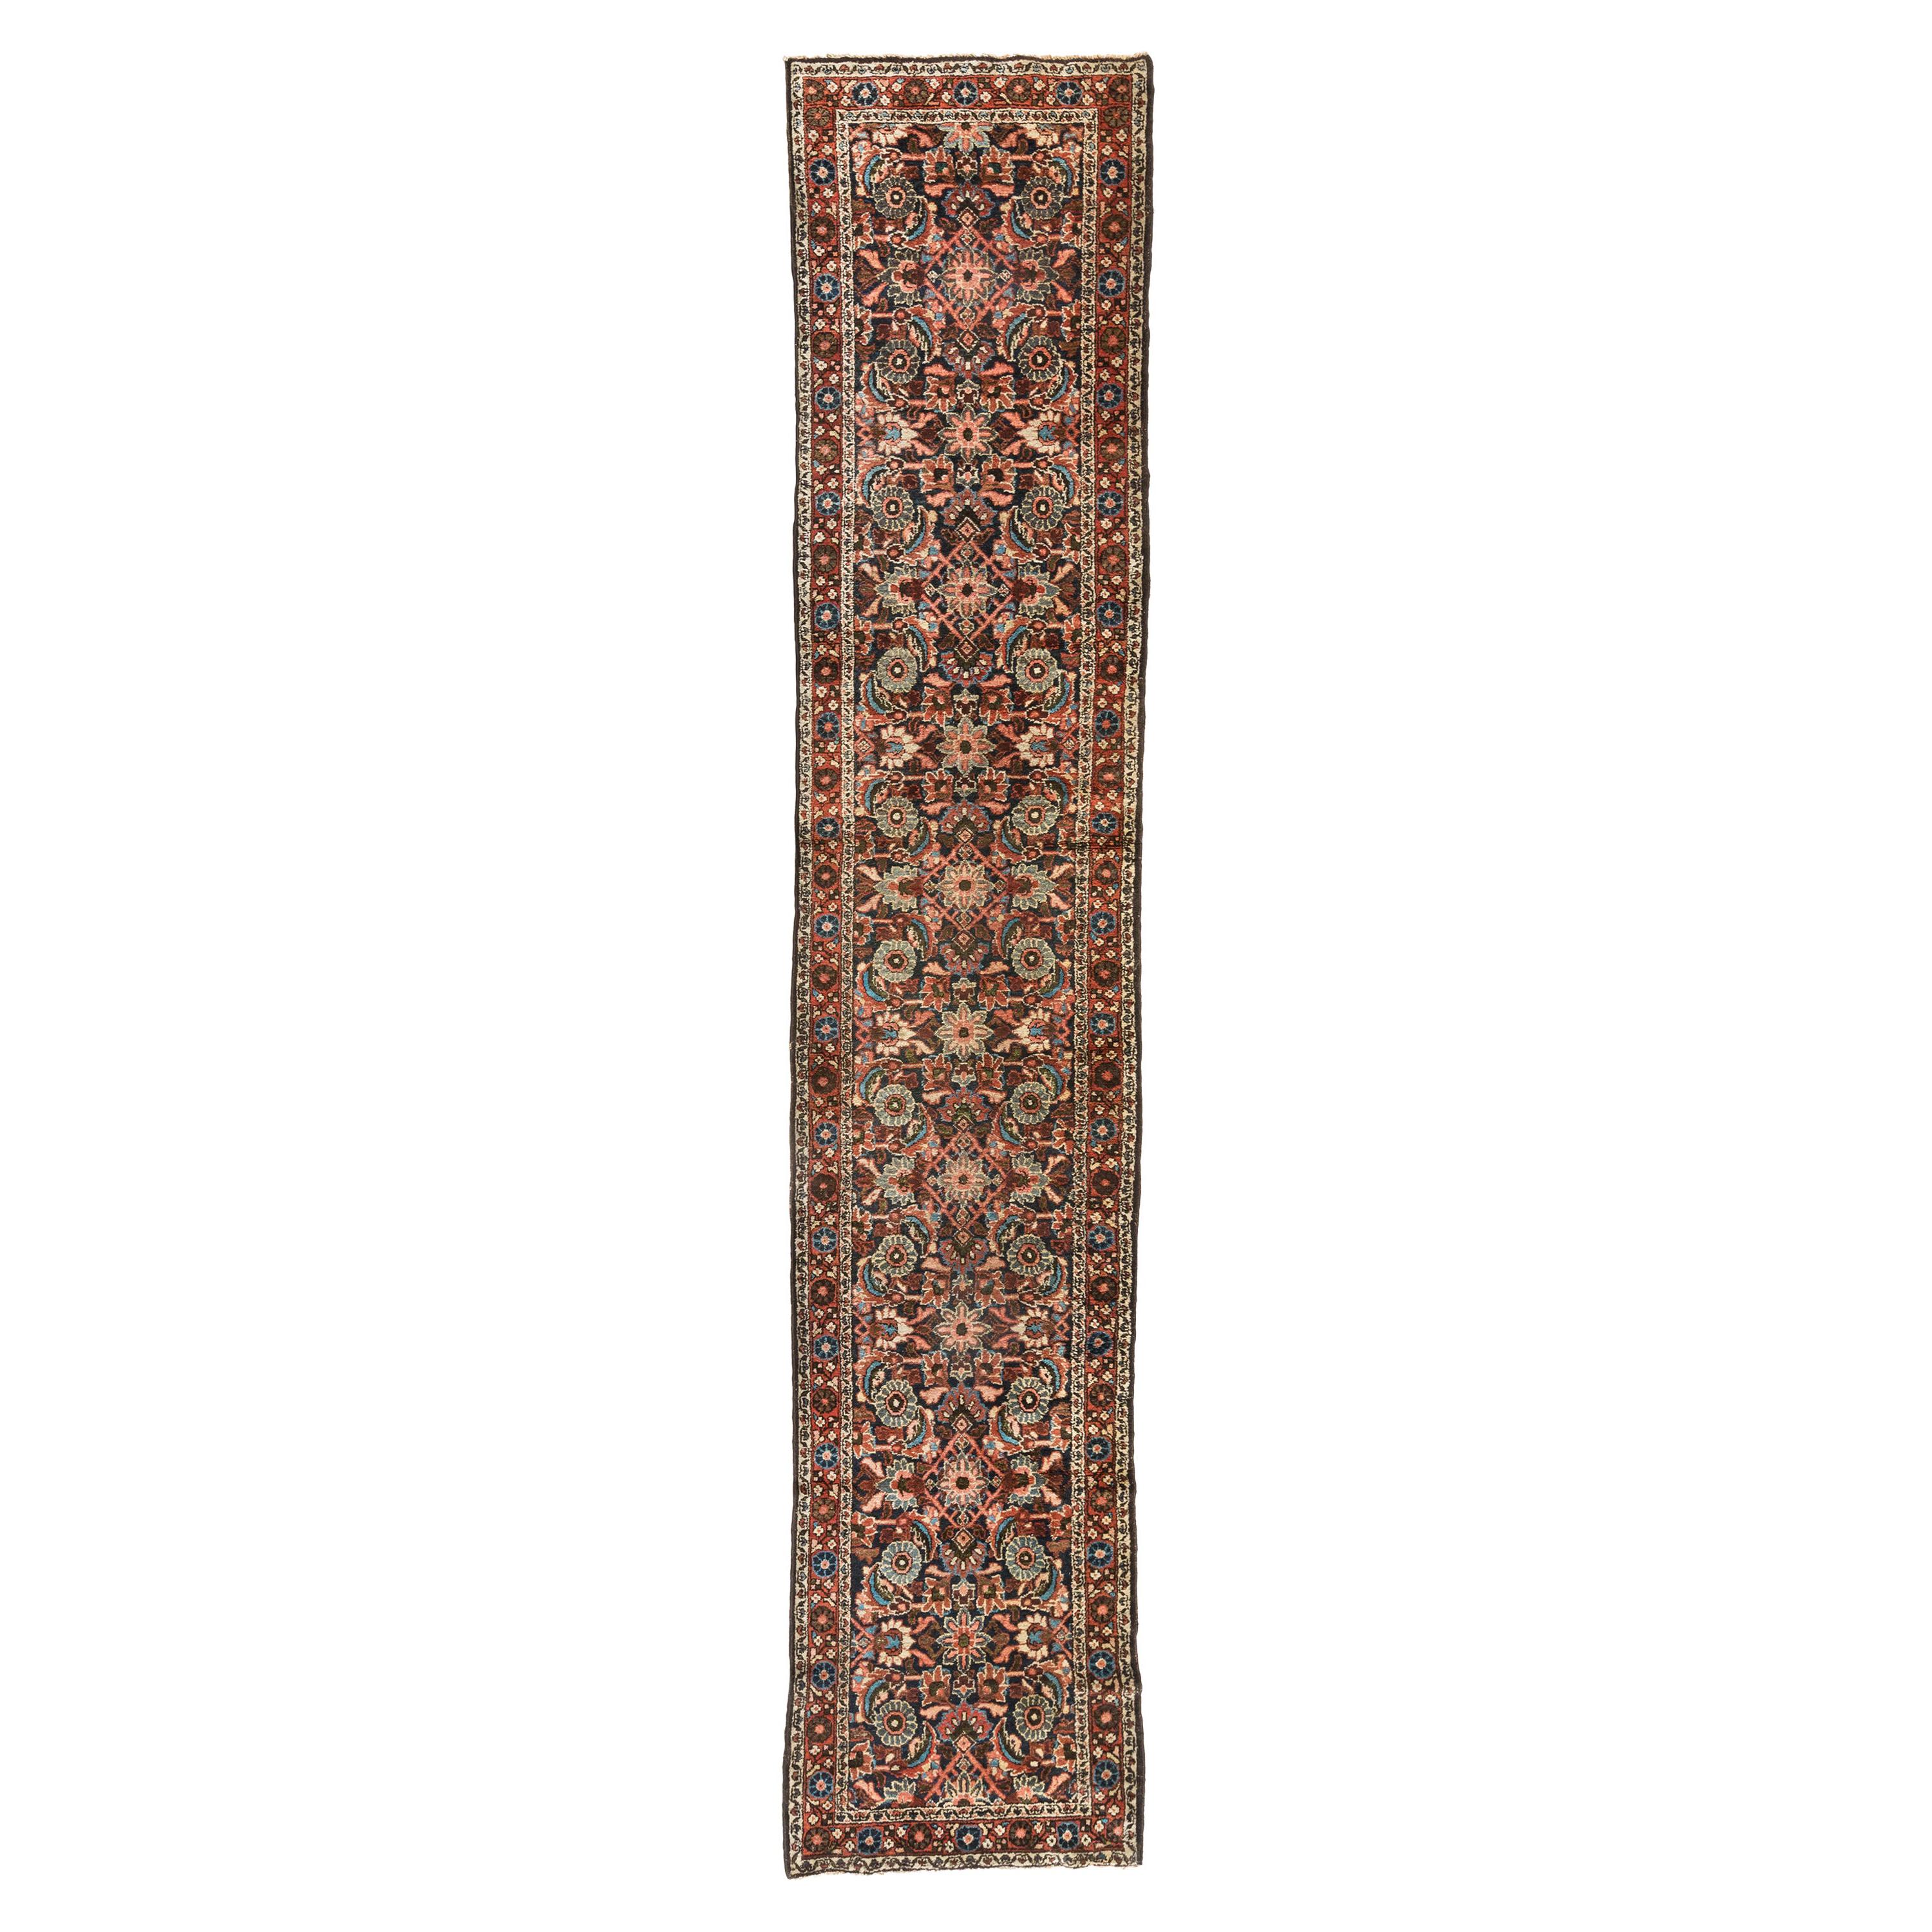 Antique Brown and Blue Persian Hamedan Runner Rug, circa 1920-1930s For Sale